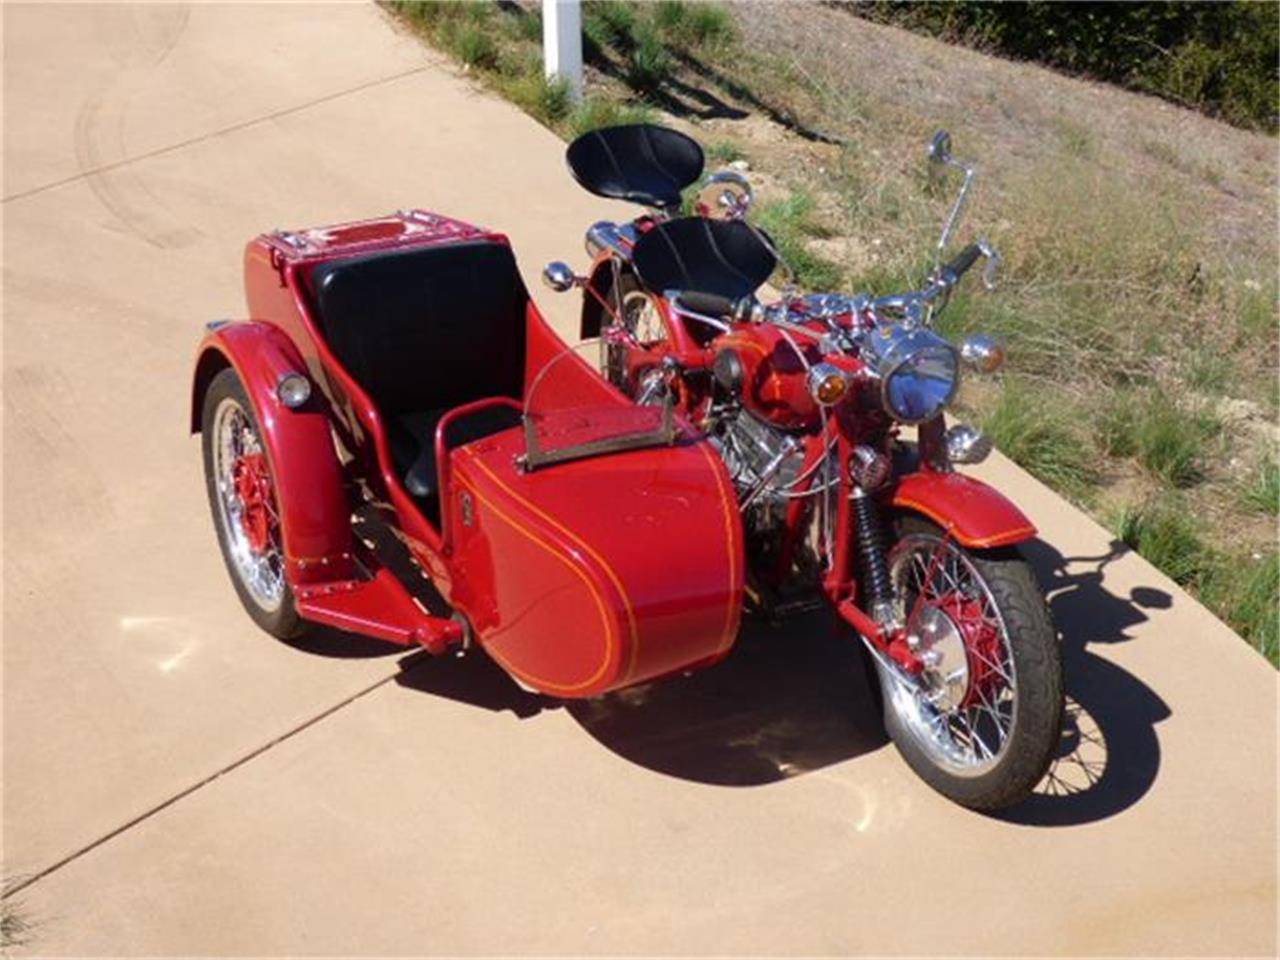 1965 BMW Motorcycle for Sale | ClassicCars.com | CC-733933